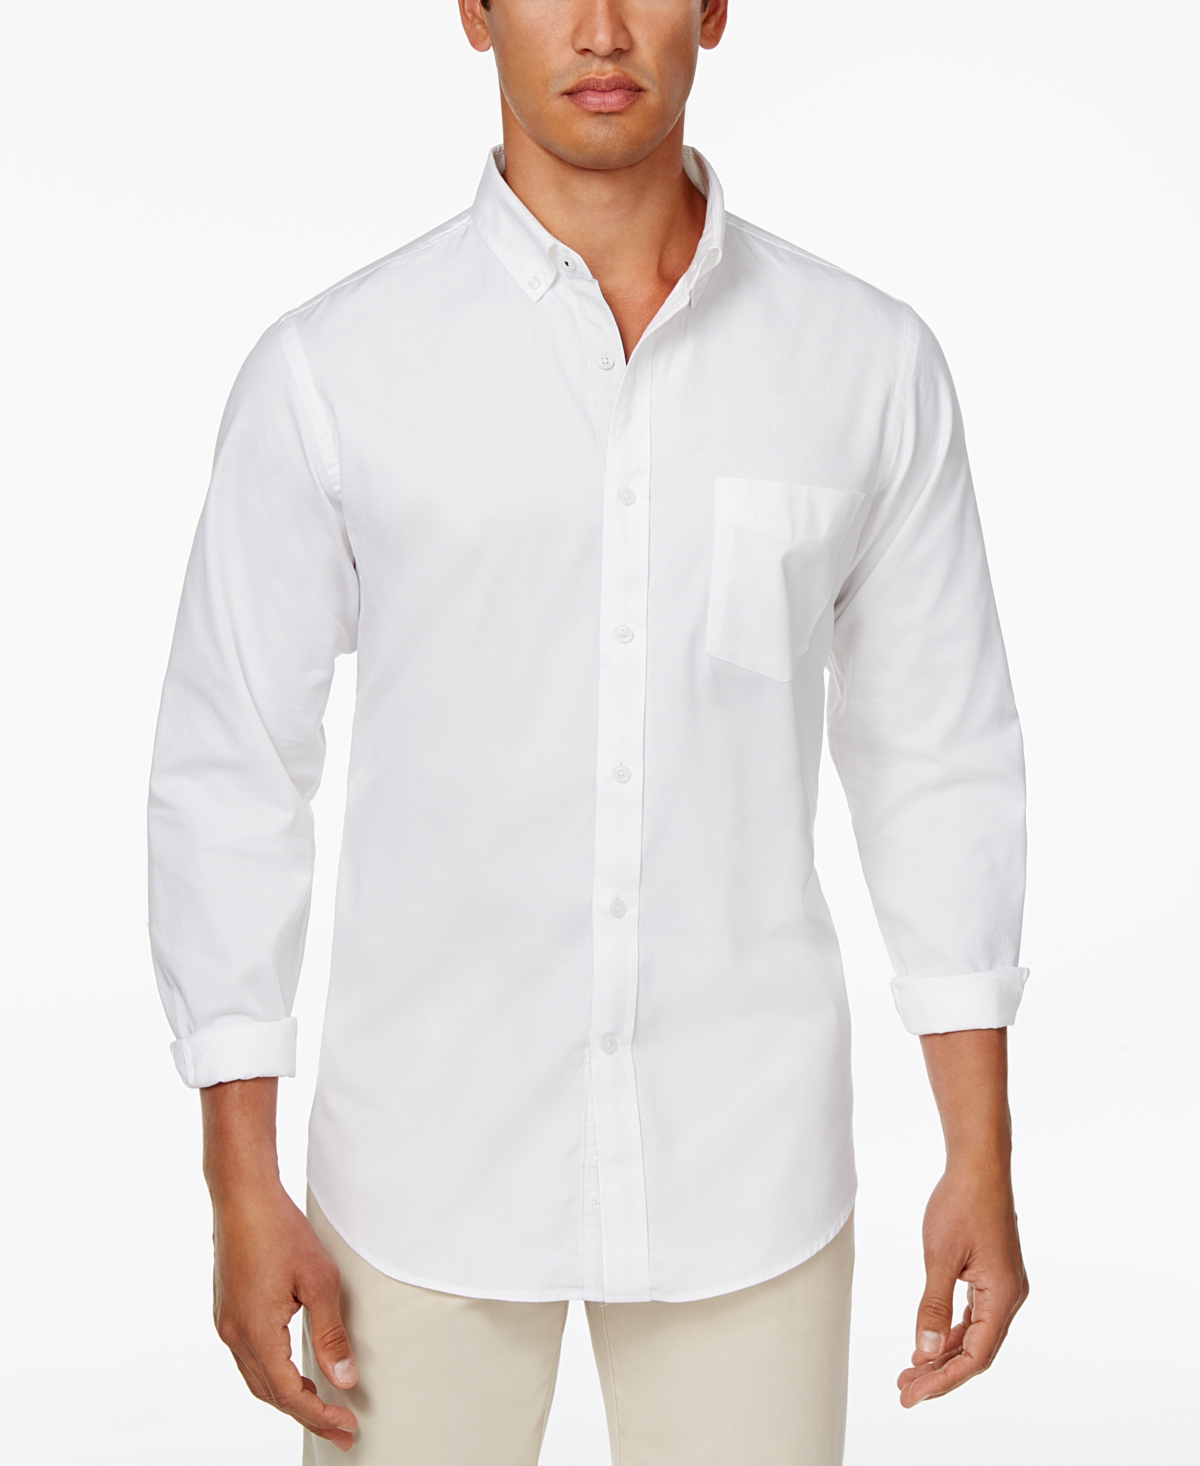 Men's Solid Stretch Oxford Cotton Shirt, Created for Macy's - Aqua Reef